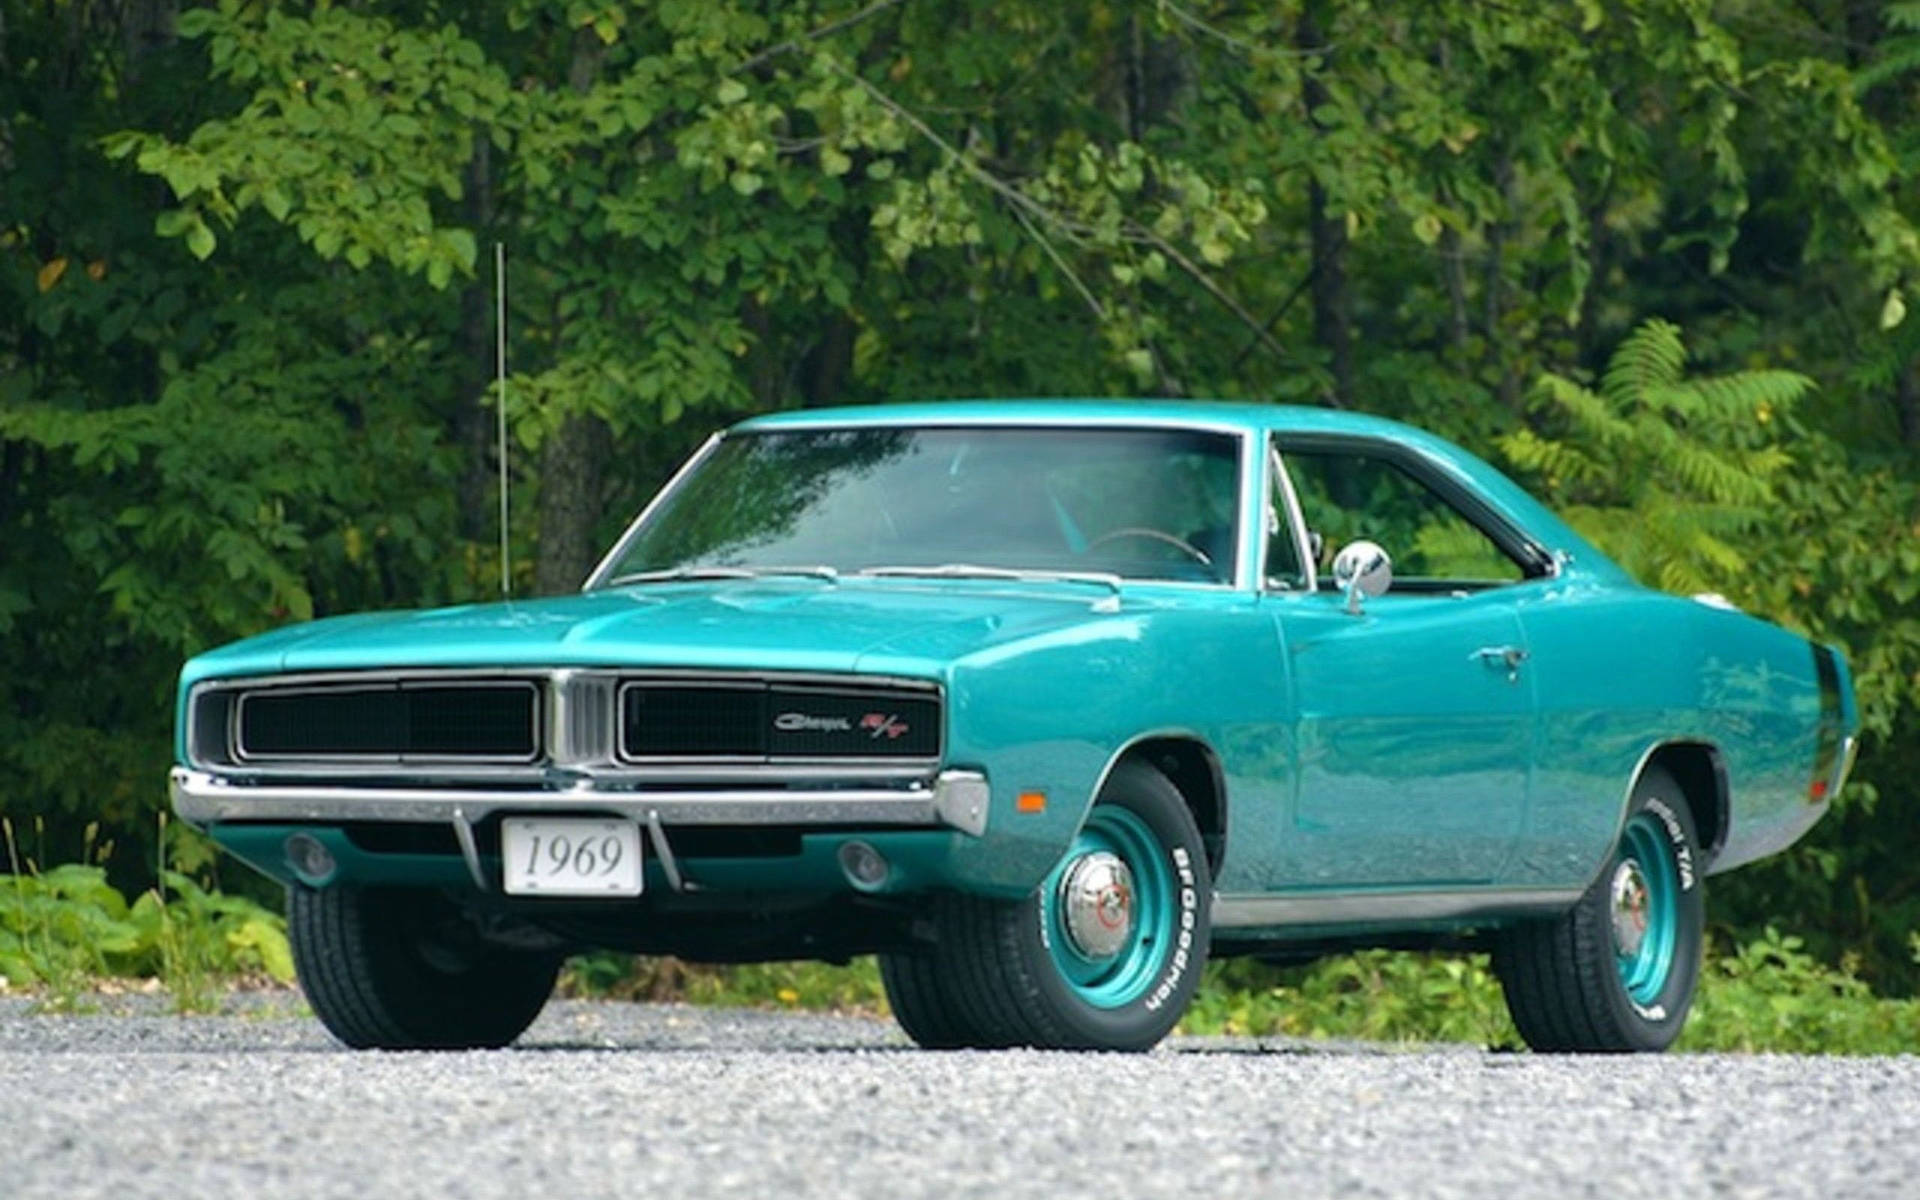 Teal 1969 Dodge Charger